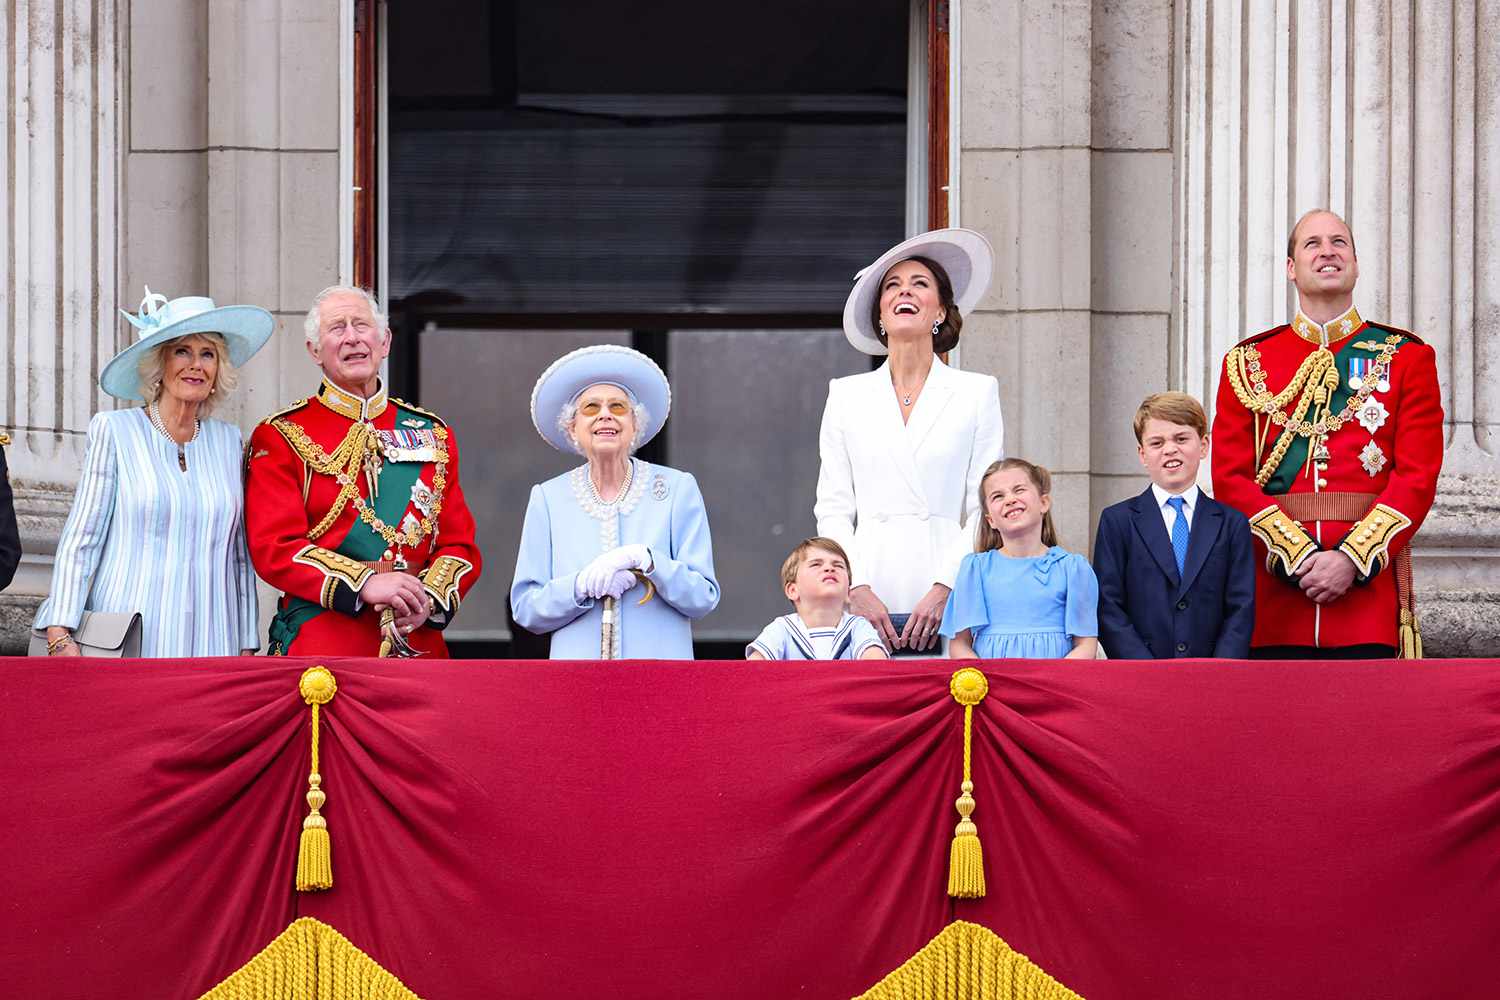 Camilla, Duchess of Cornwall, Prince Charles, Prince of Wales, Queen Elizabeth II, Prince Louis of Cambridge, Catherine, Duchess of Cambridge, Princess Charlotte of Cambridge, Prince George of Cambridge and Prince William, Duke of Cambridge watch the RAF flypast on the balcony of Buckingham Palace during the Trooping the Colour parade on June 02, 2022